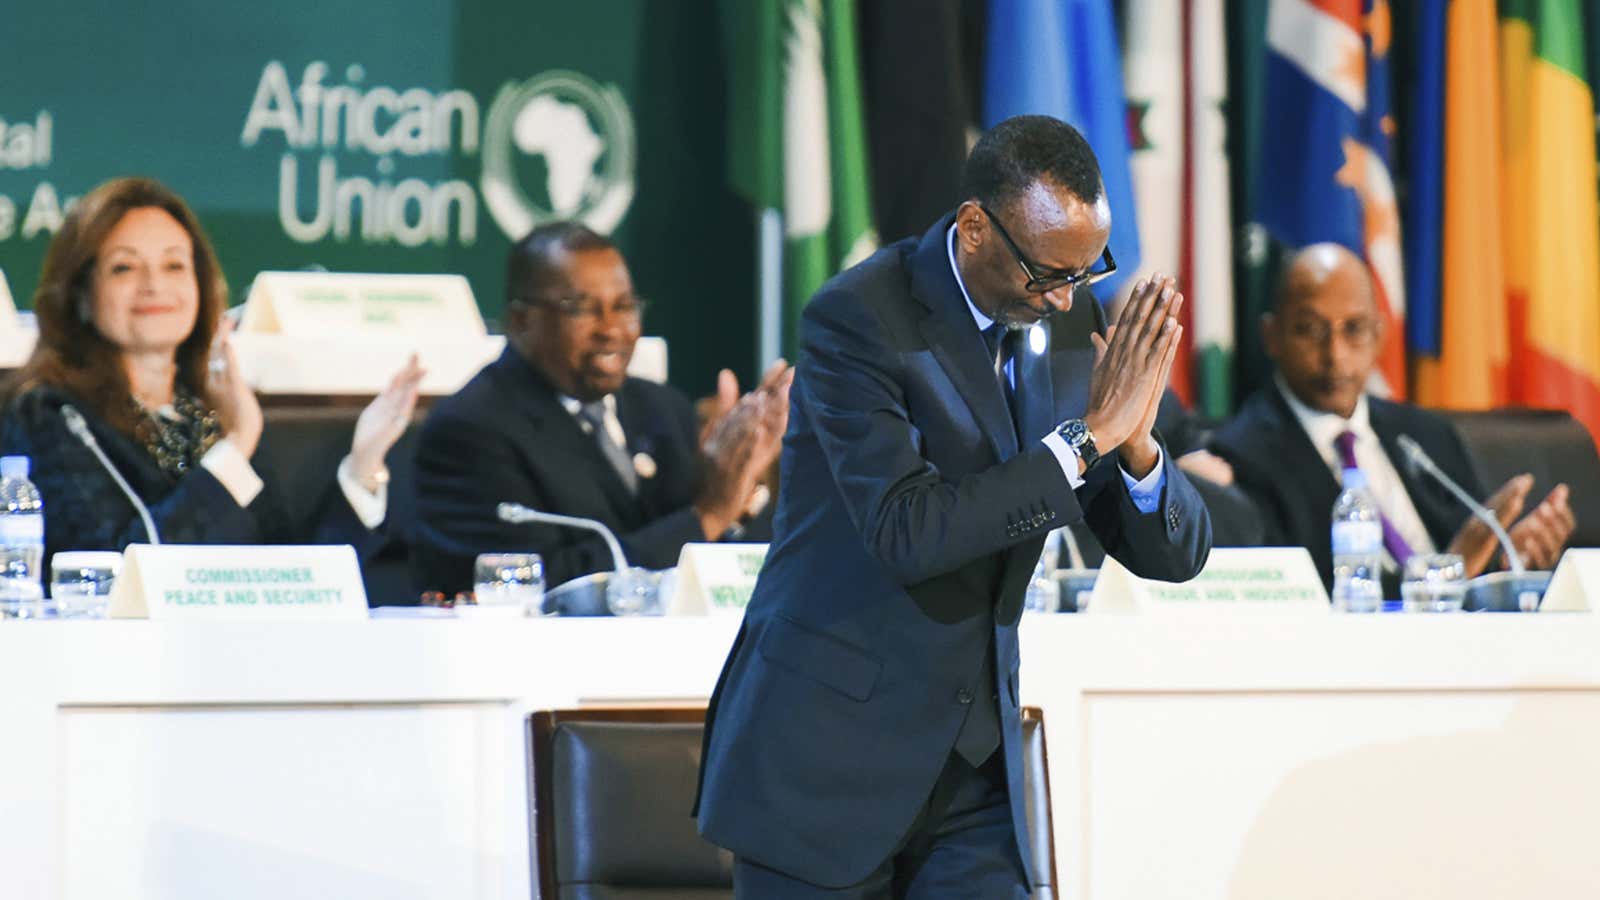 Rwanda’s President Paul Kagame acknowledges fellow African leaders after signing the African Continental Free Trade Area (CFTA) Agreement on Mar. 21, 2018.